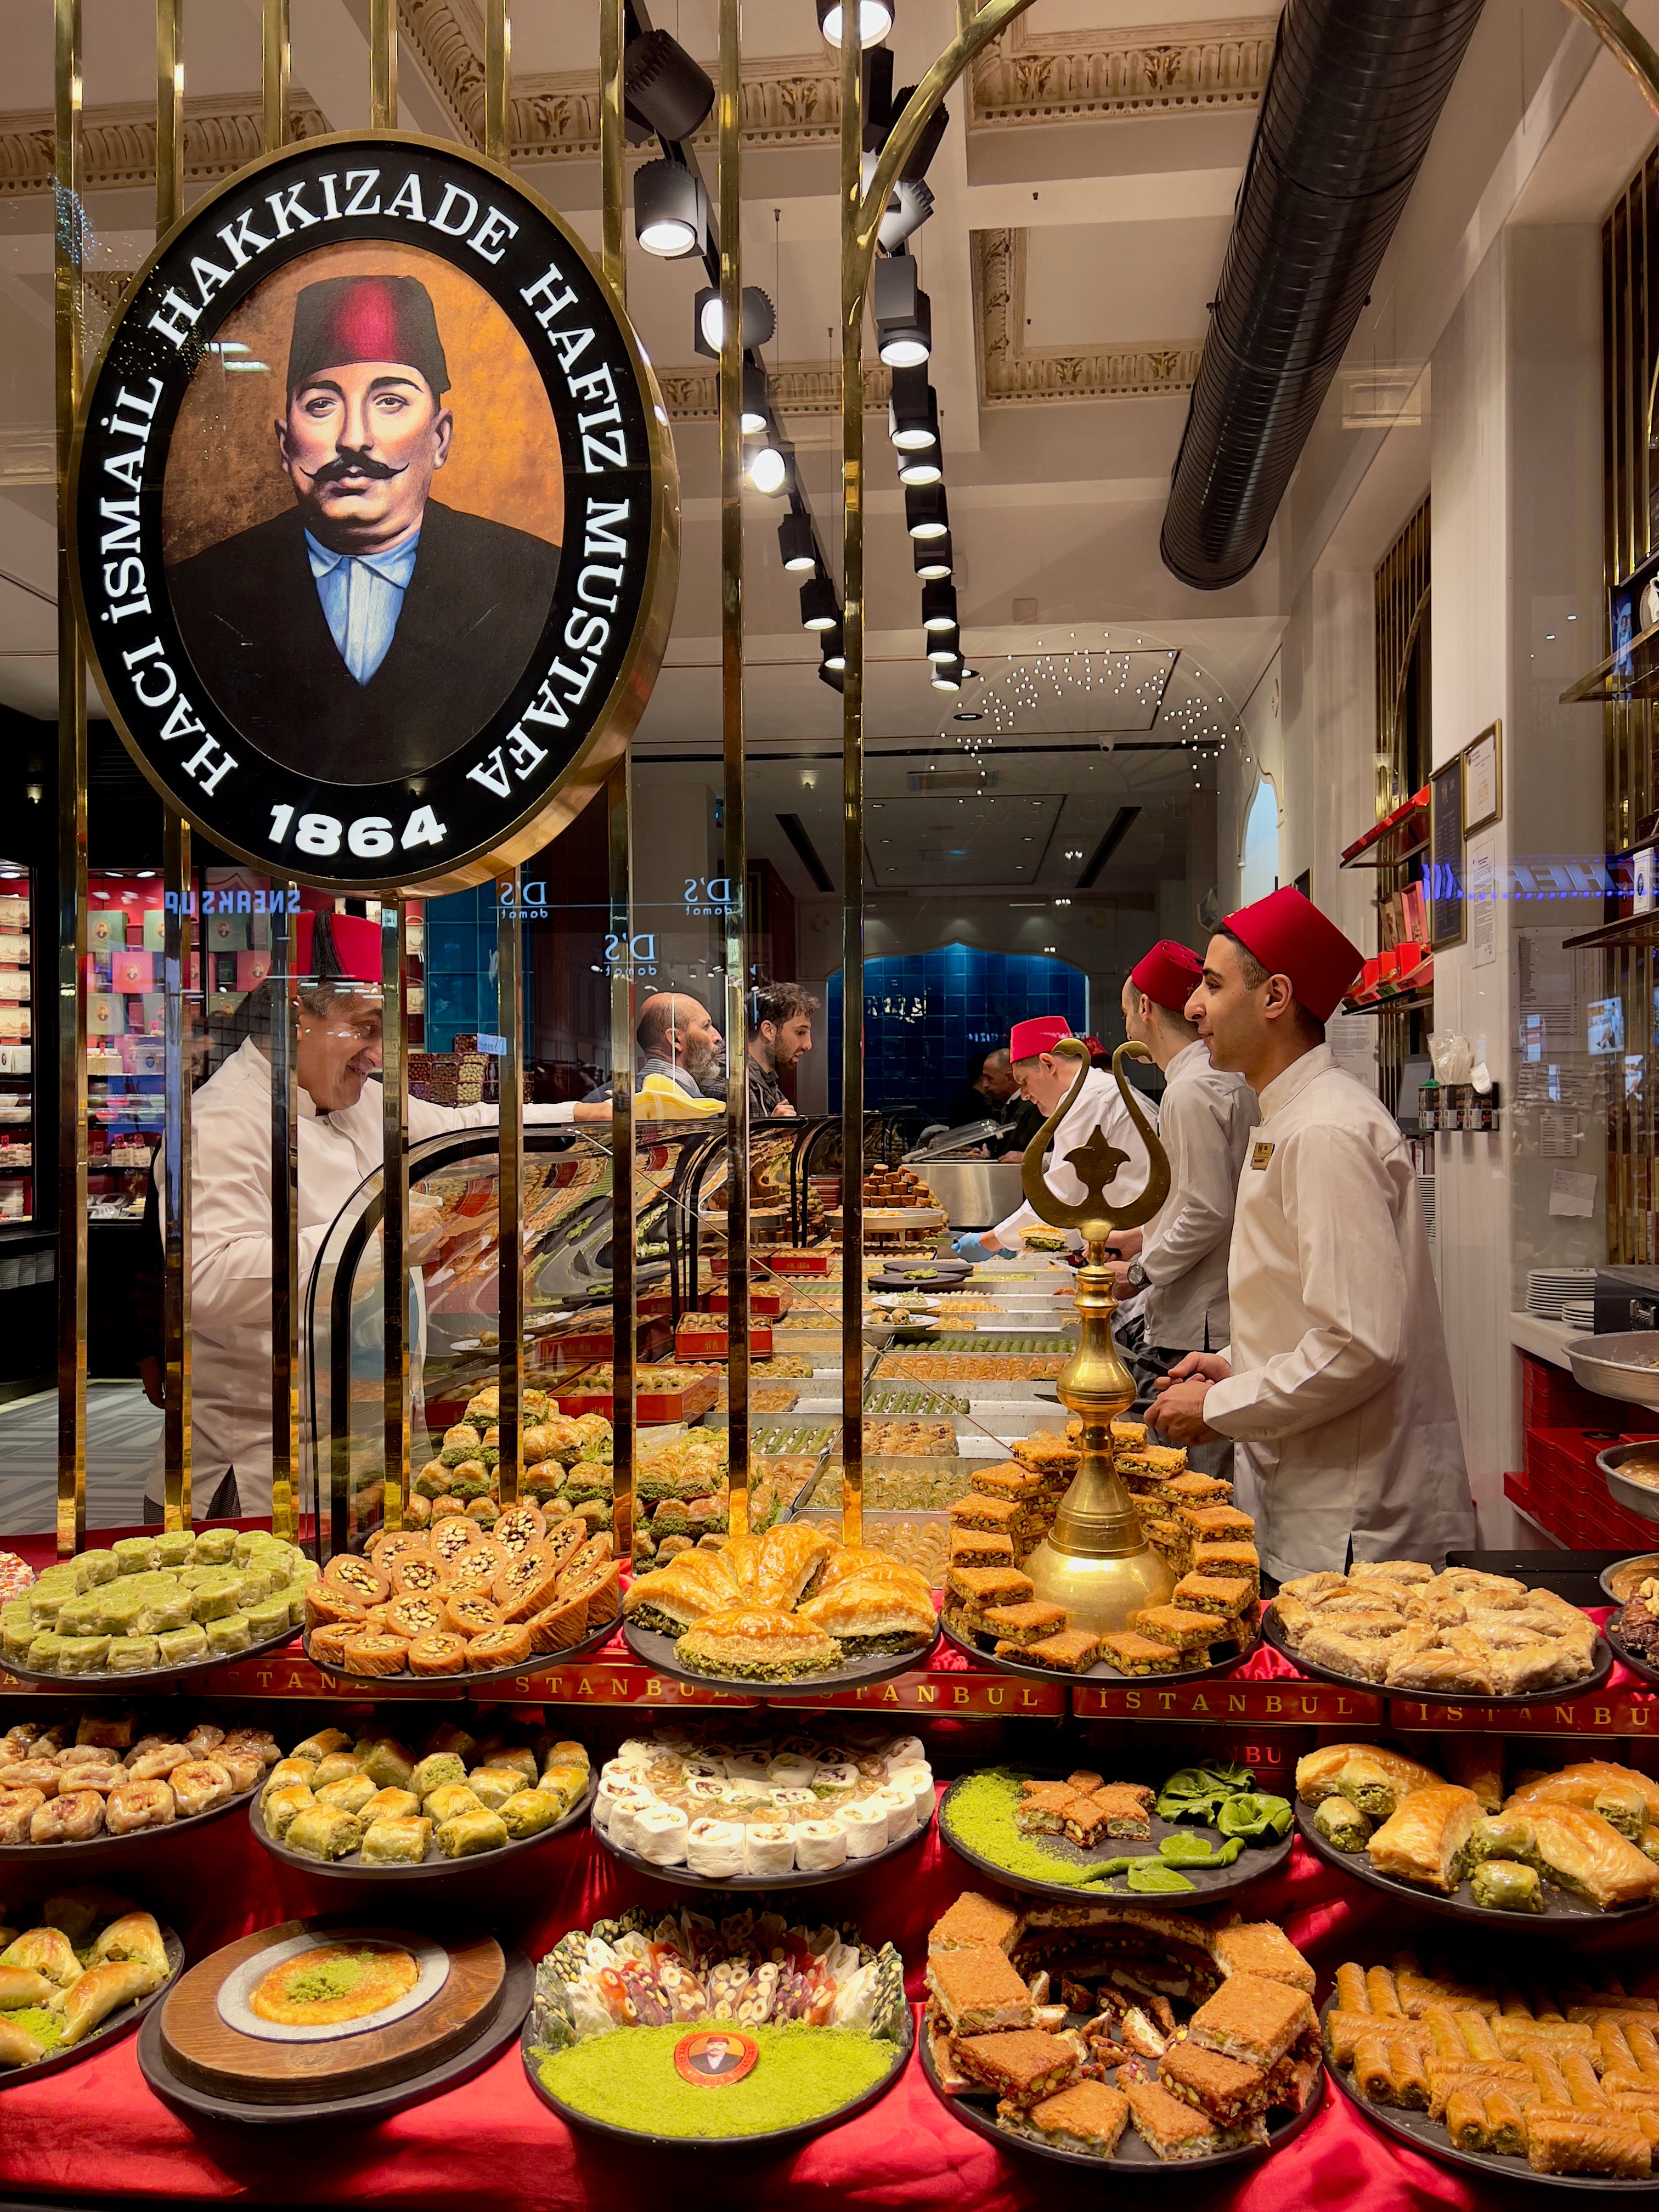 Many of the shops on Istanbul’s Istiklal Street proudly declare their 19th-century foundation, including those selling sticky pastries and serious Turkish delight. Photo: Peter Neville-Hadley